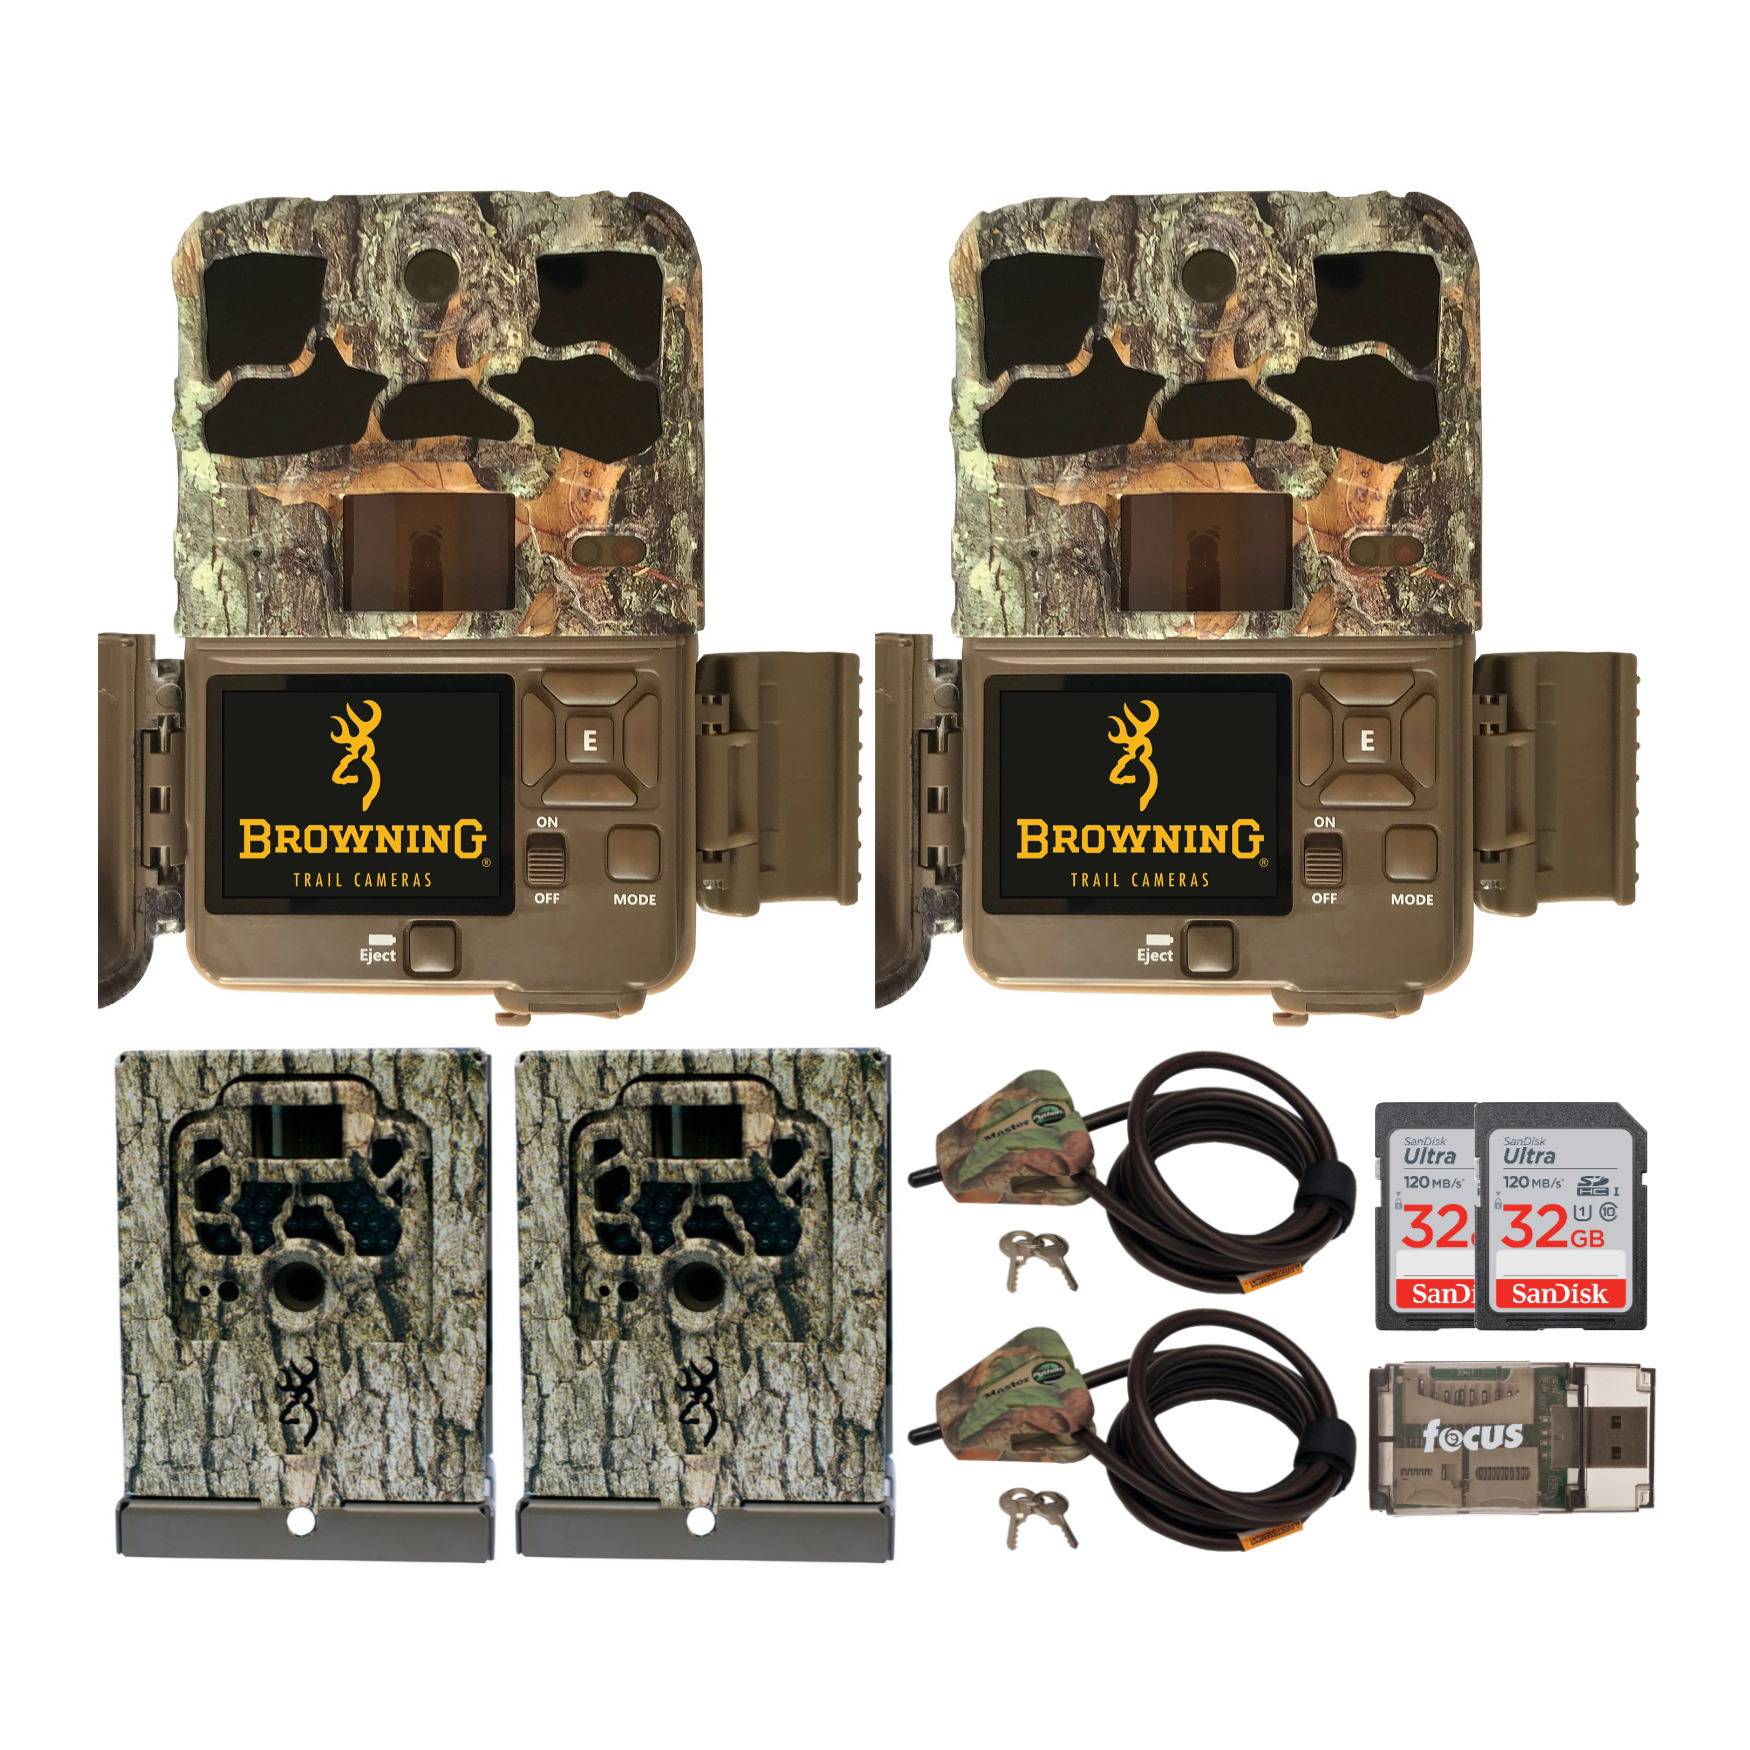 Browning Trail Cameras 20MP Spec OPS Edge Trail Camera Security Bundle (2-Pack)